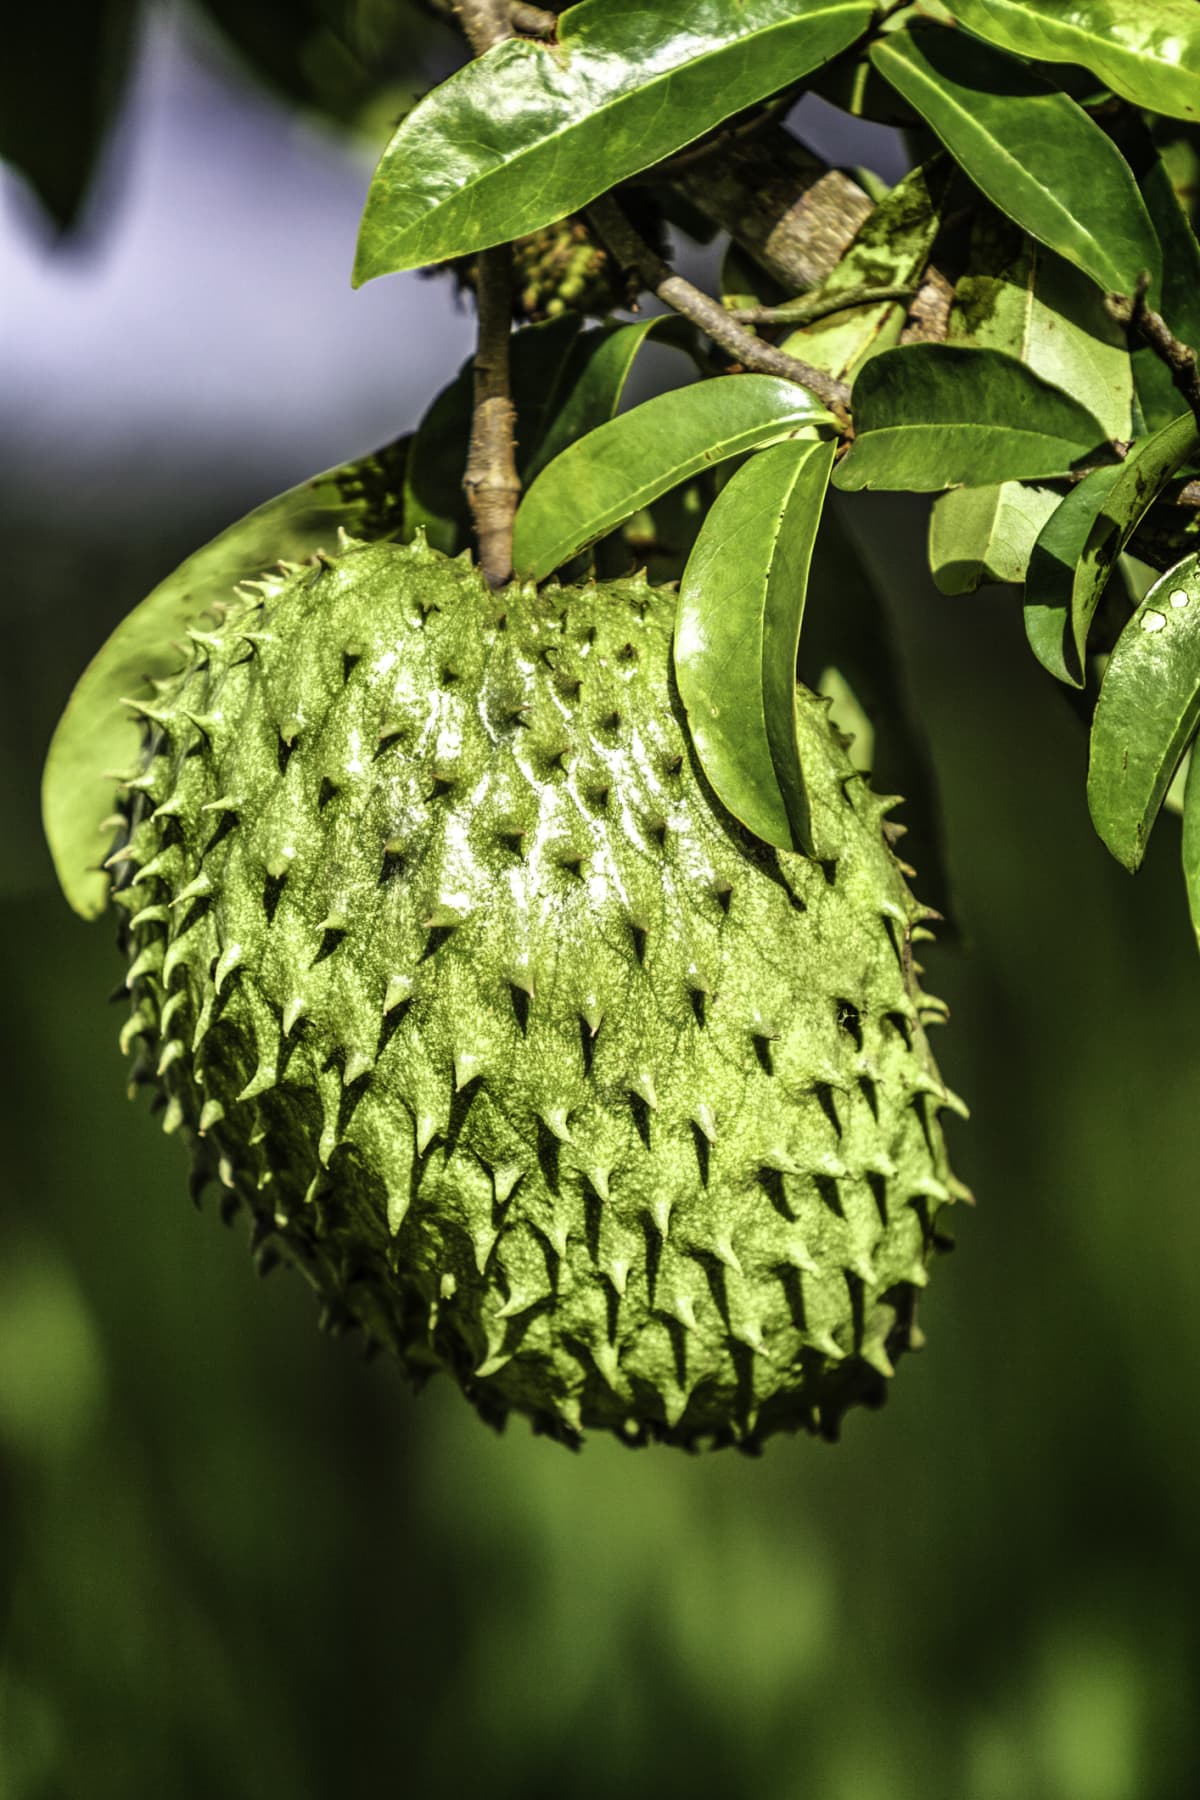 Soursop on the tree